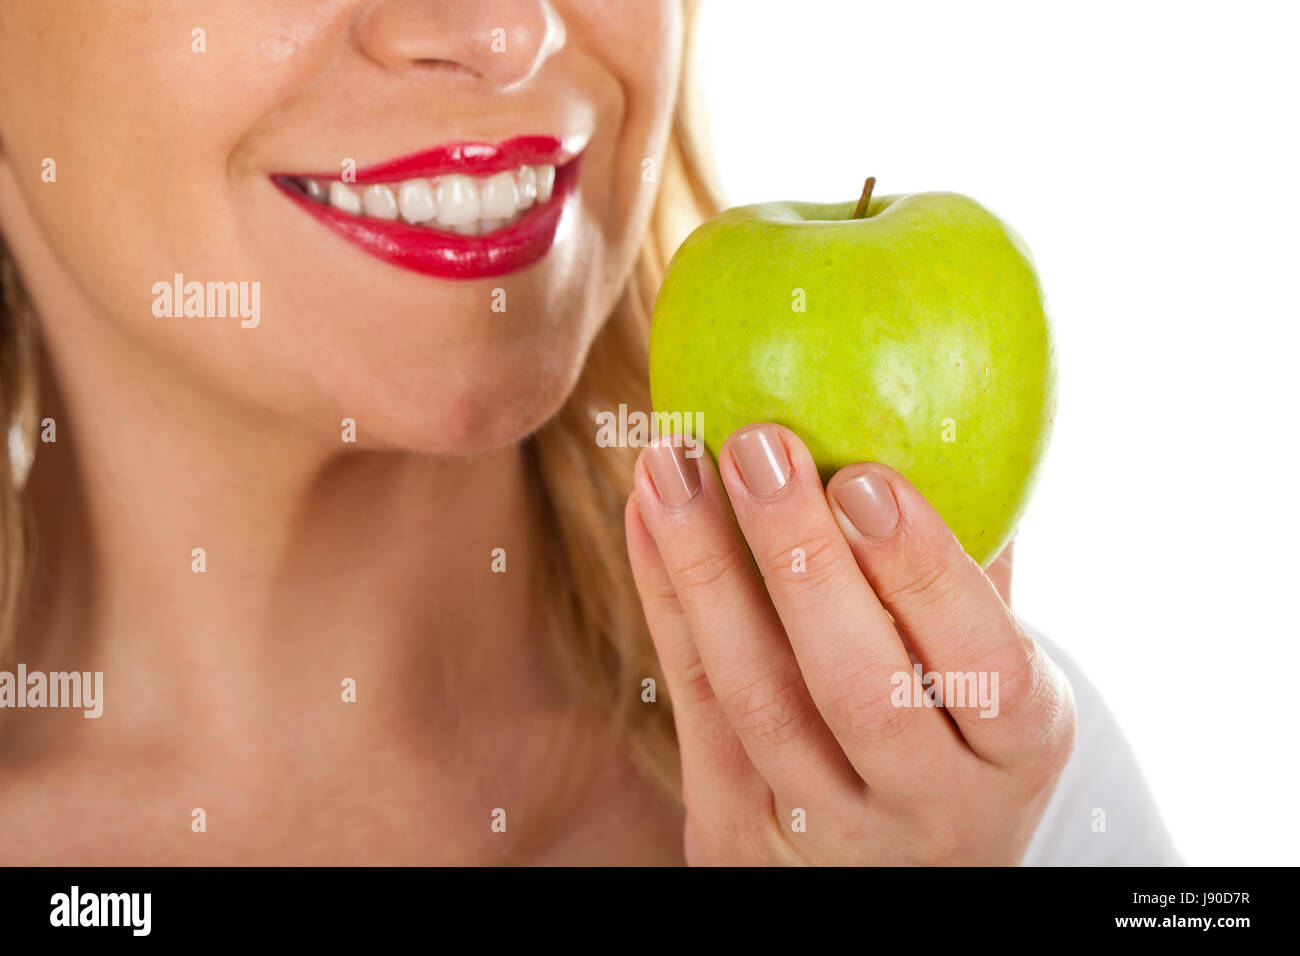 Close up picture of a beautiful woman's red lips and a fresh green apple Stock Photo